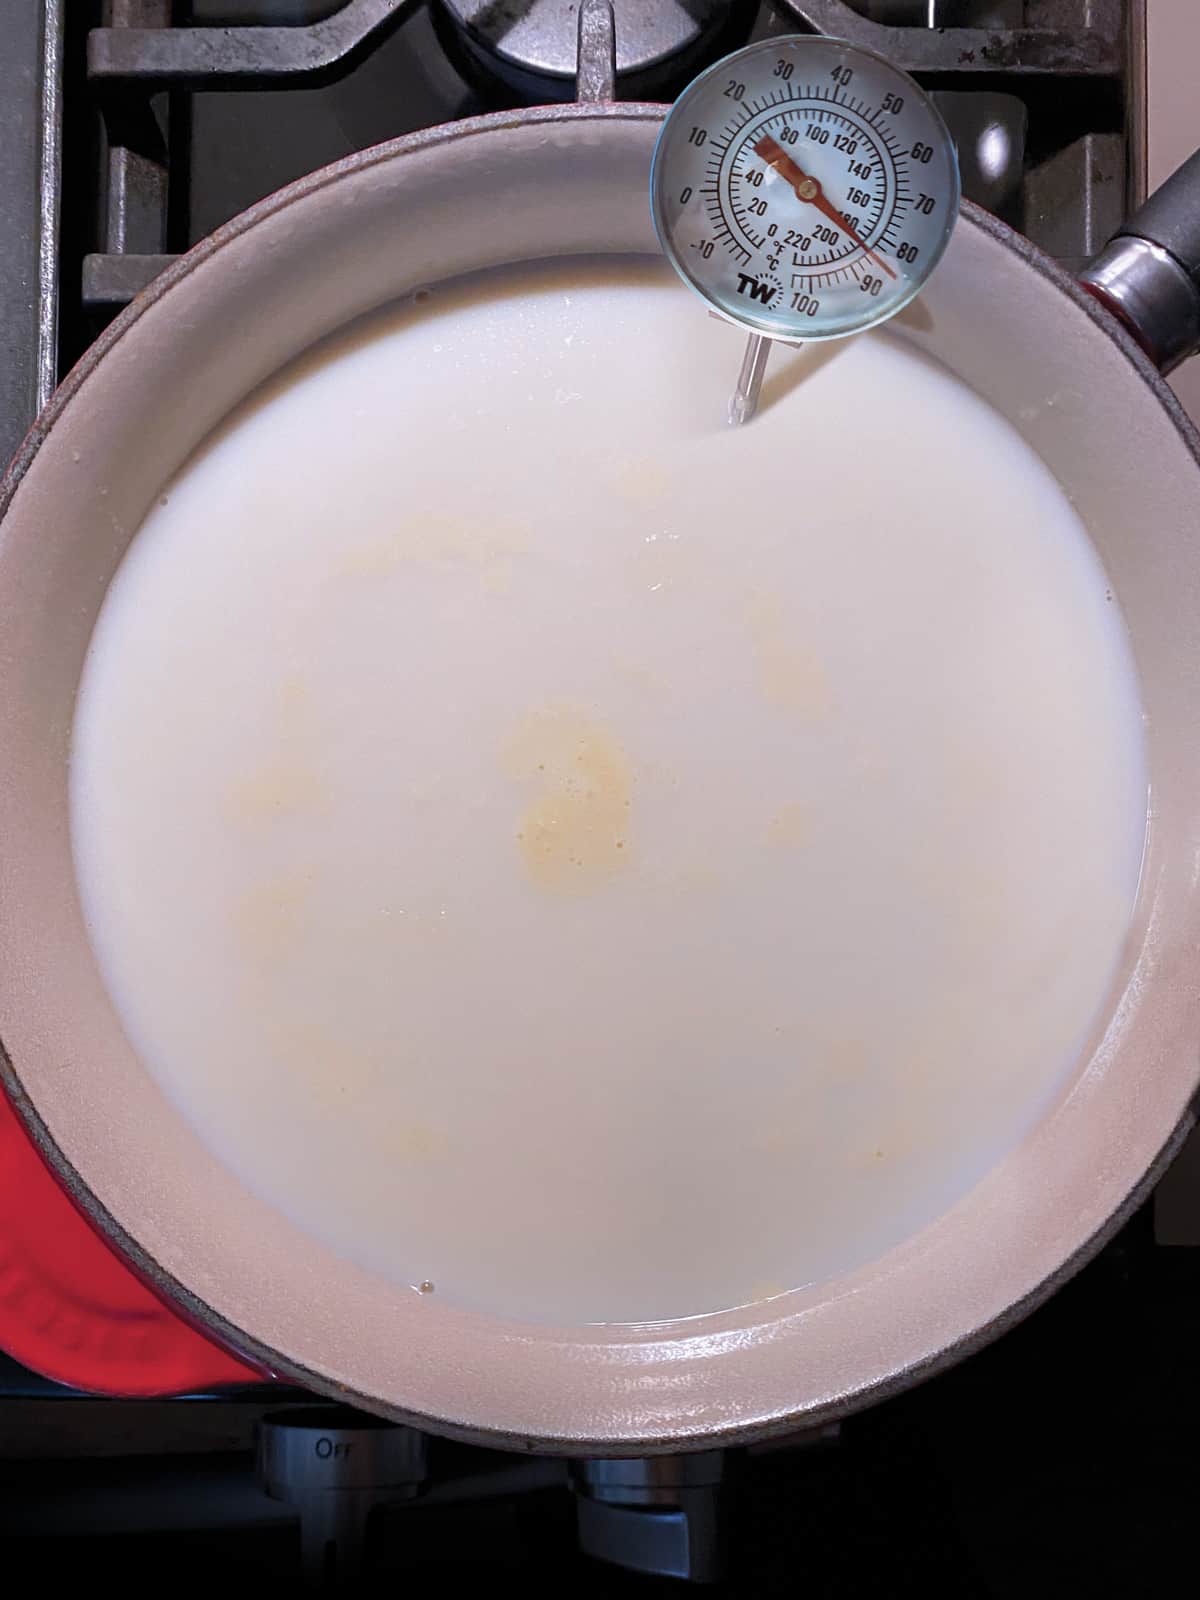 A sauce pan on the stove full with milk and a milk thermometer.